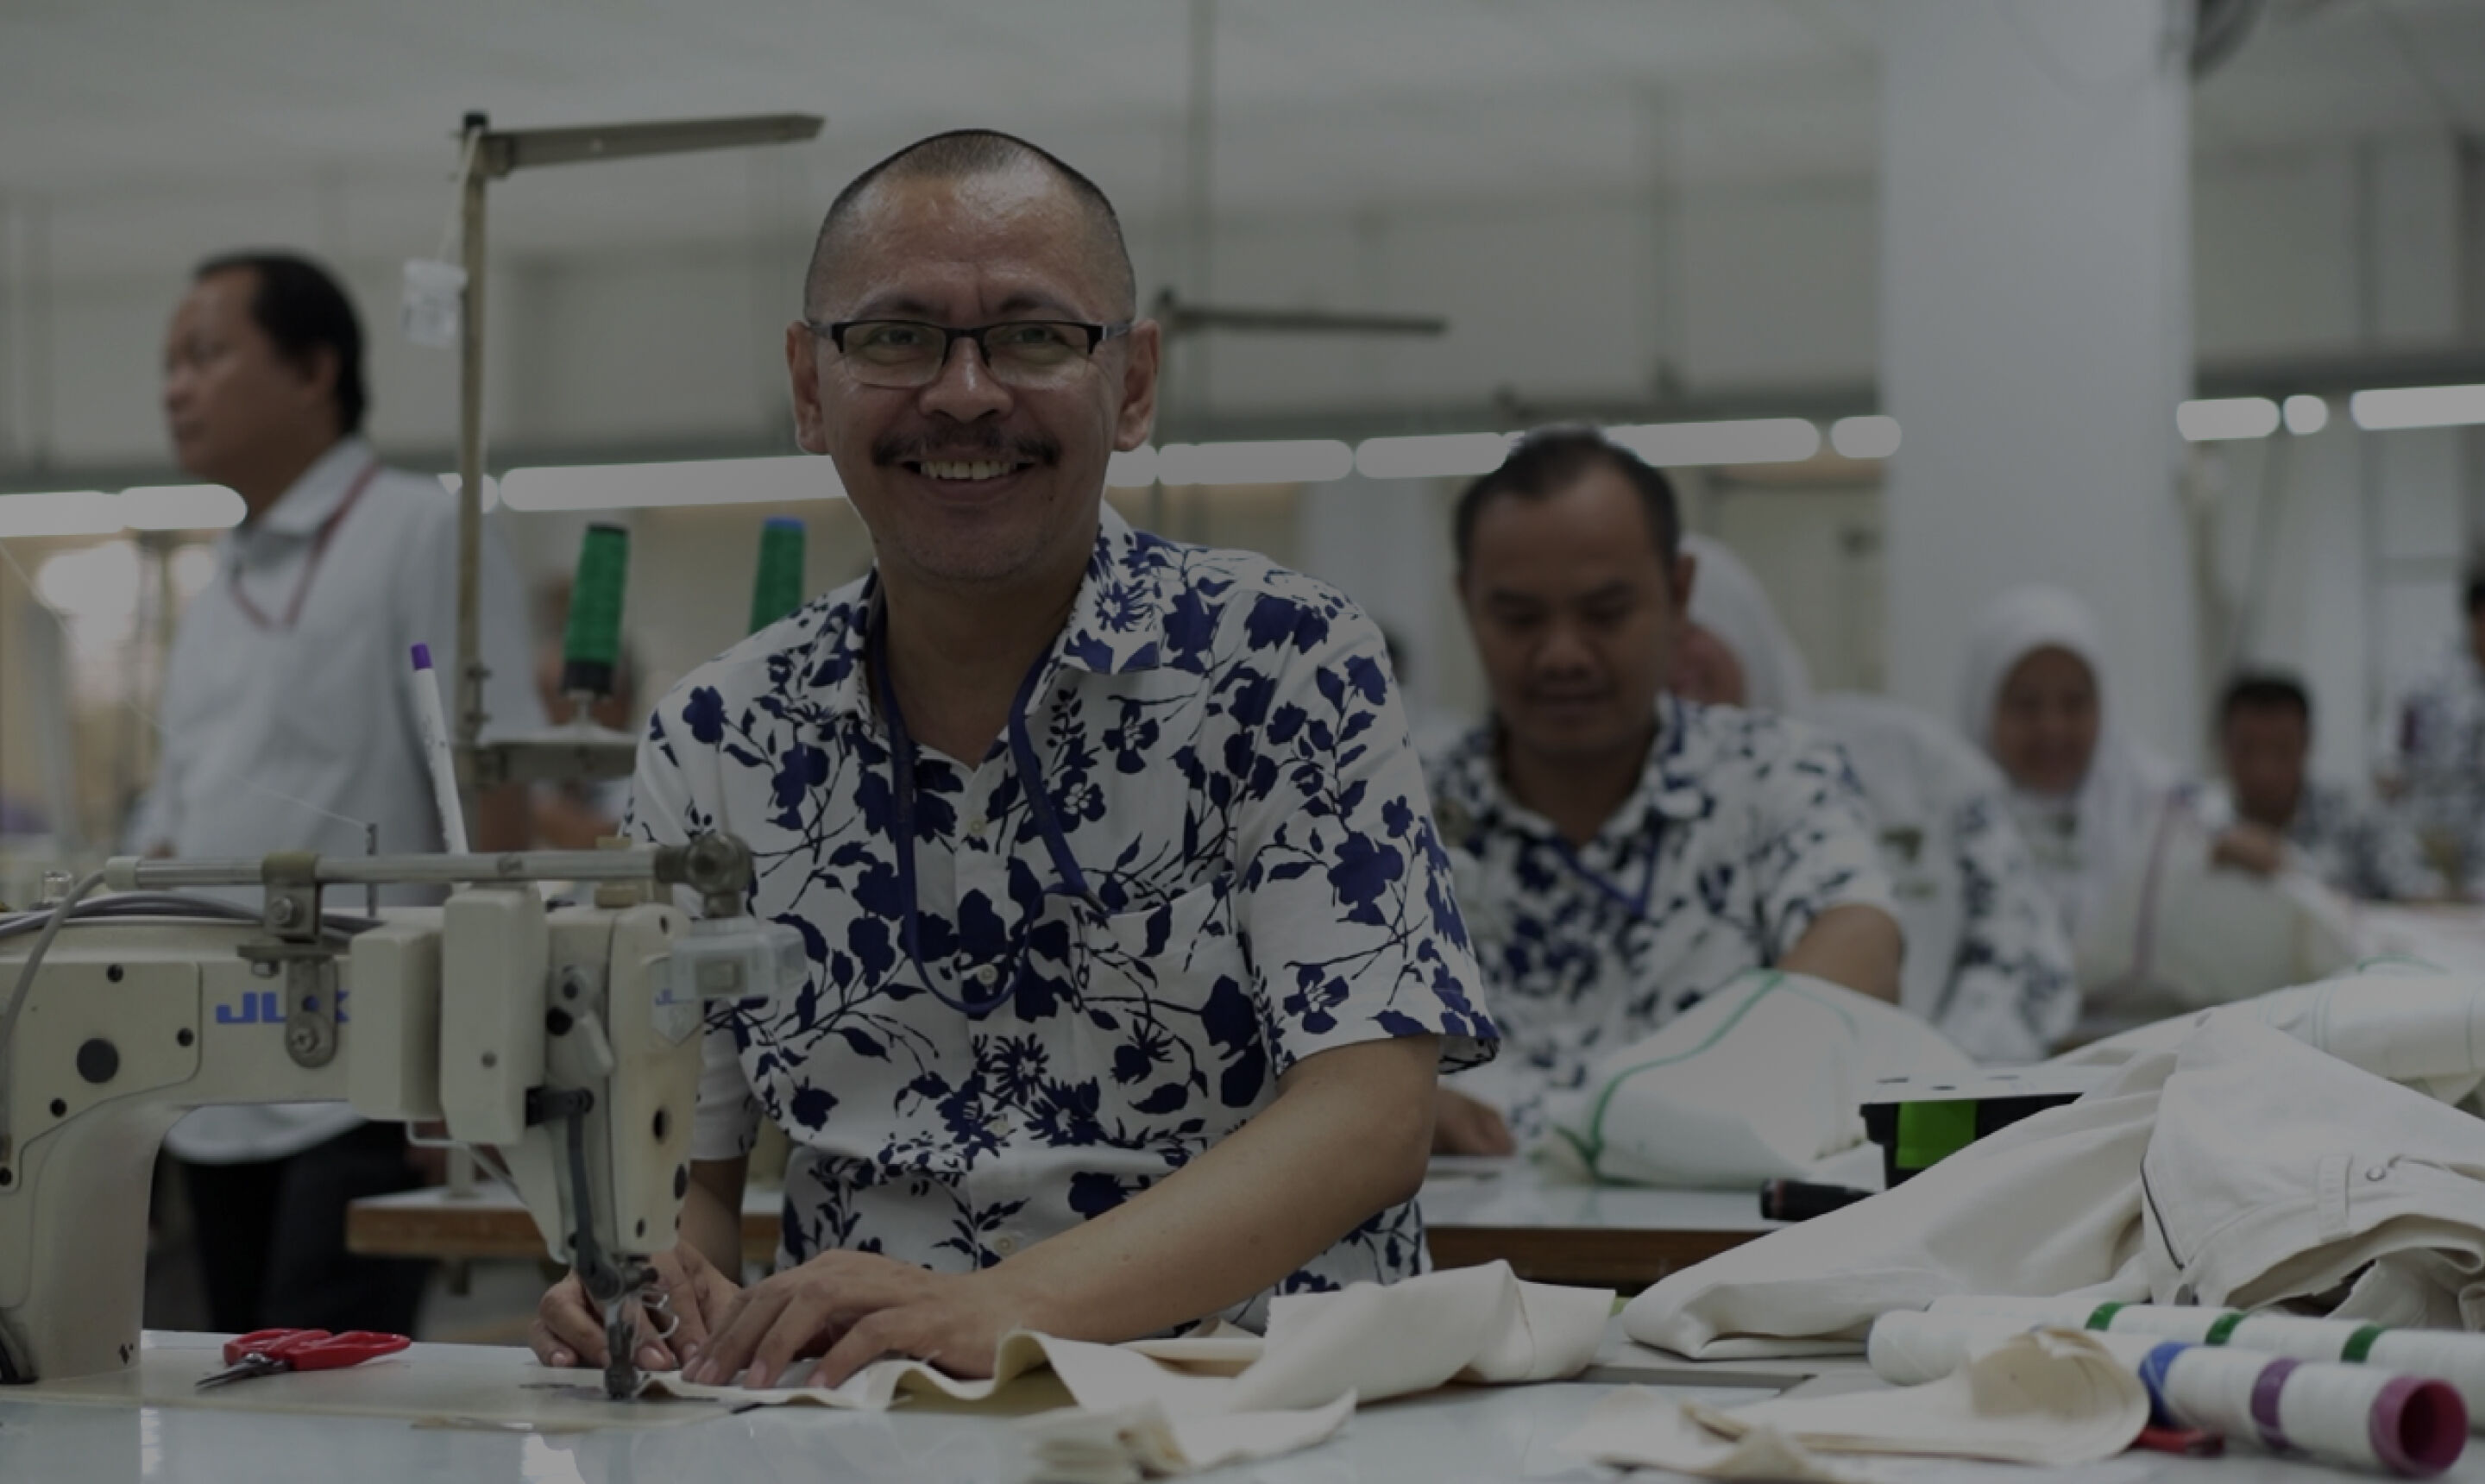 Man sewing in garment factory.